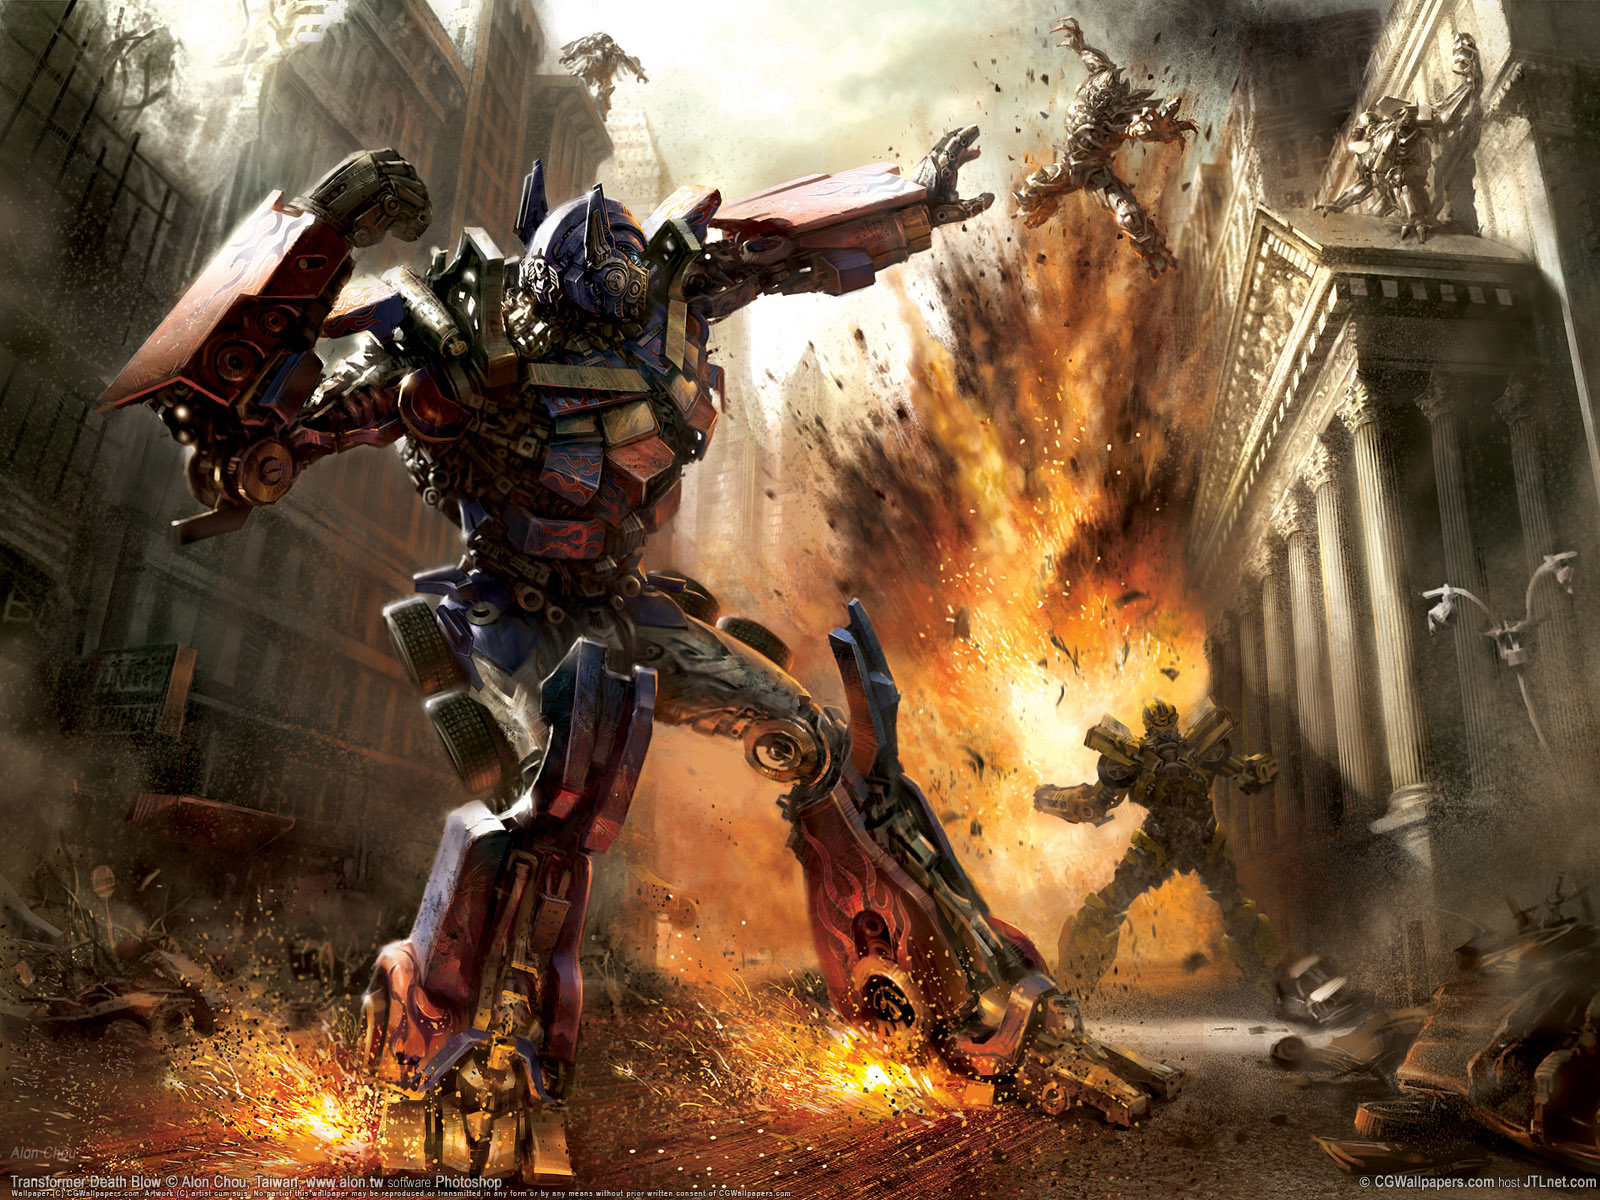 Transformers Ultimate Collection Screensavers Wallpapers Videos